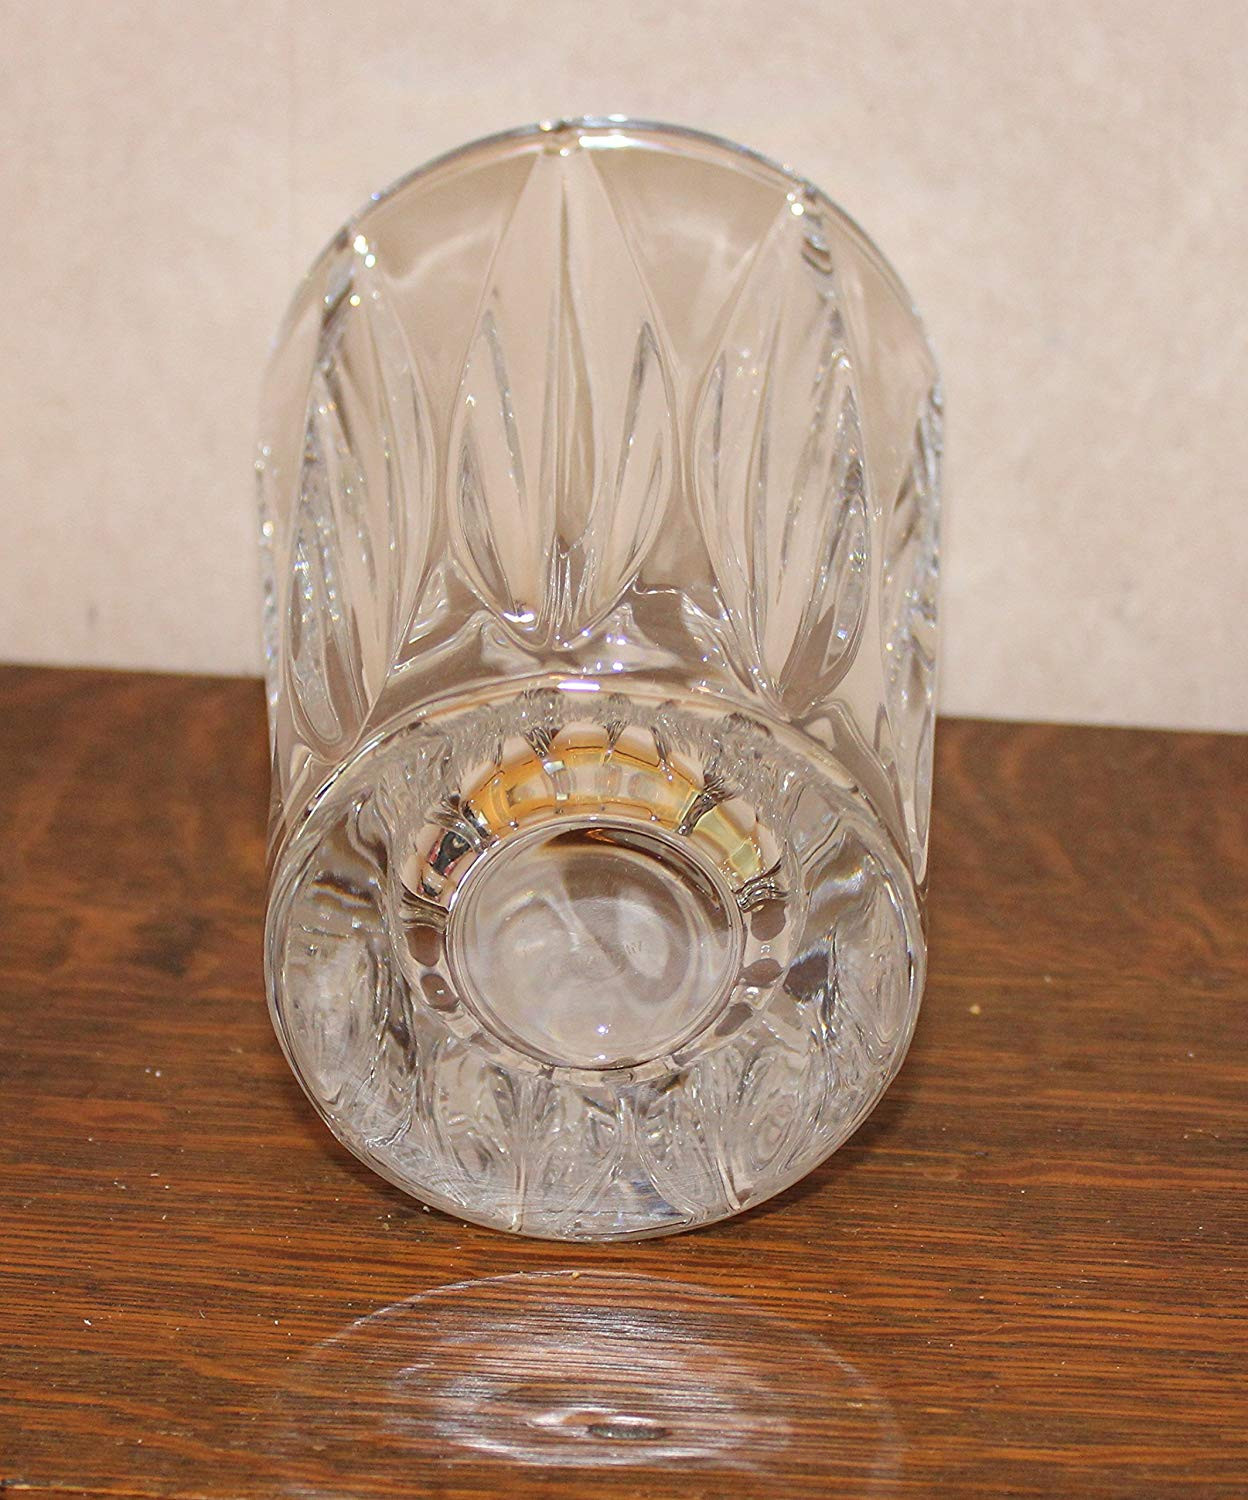 28 Perfect Waterford Giftology Lismore Sugar Bud Vase 2024 free download waterford giftology lismore sugar bud vase of amazon com villeroy boch lead crystal vase home kitchen throughout 91rxscqhhal sl1500